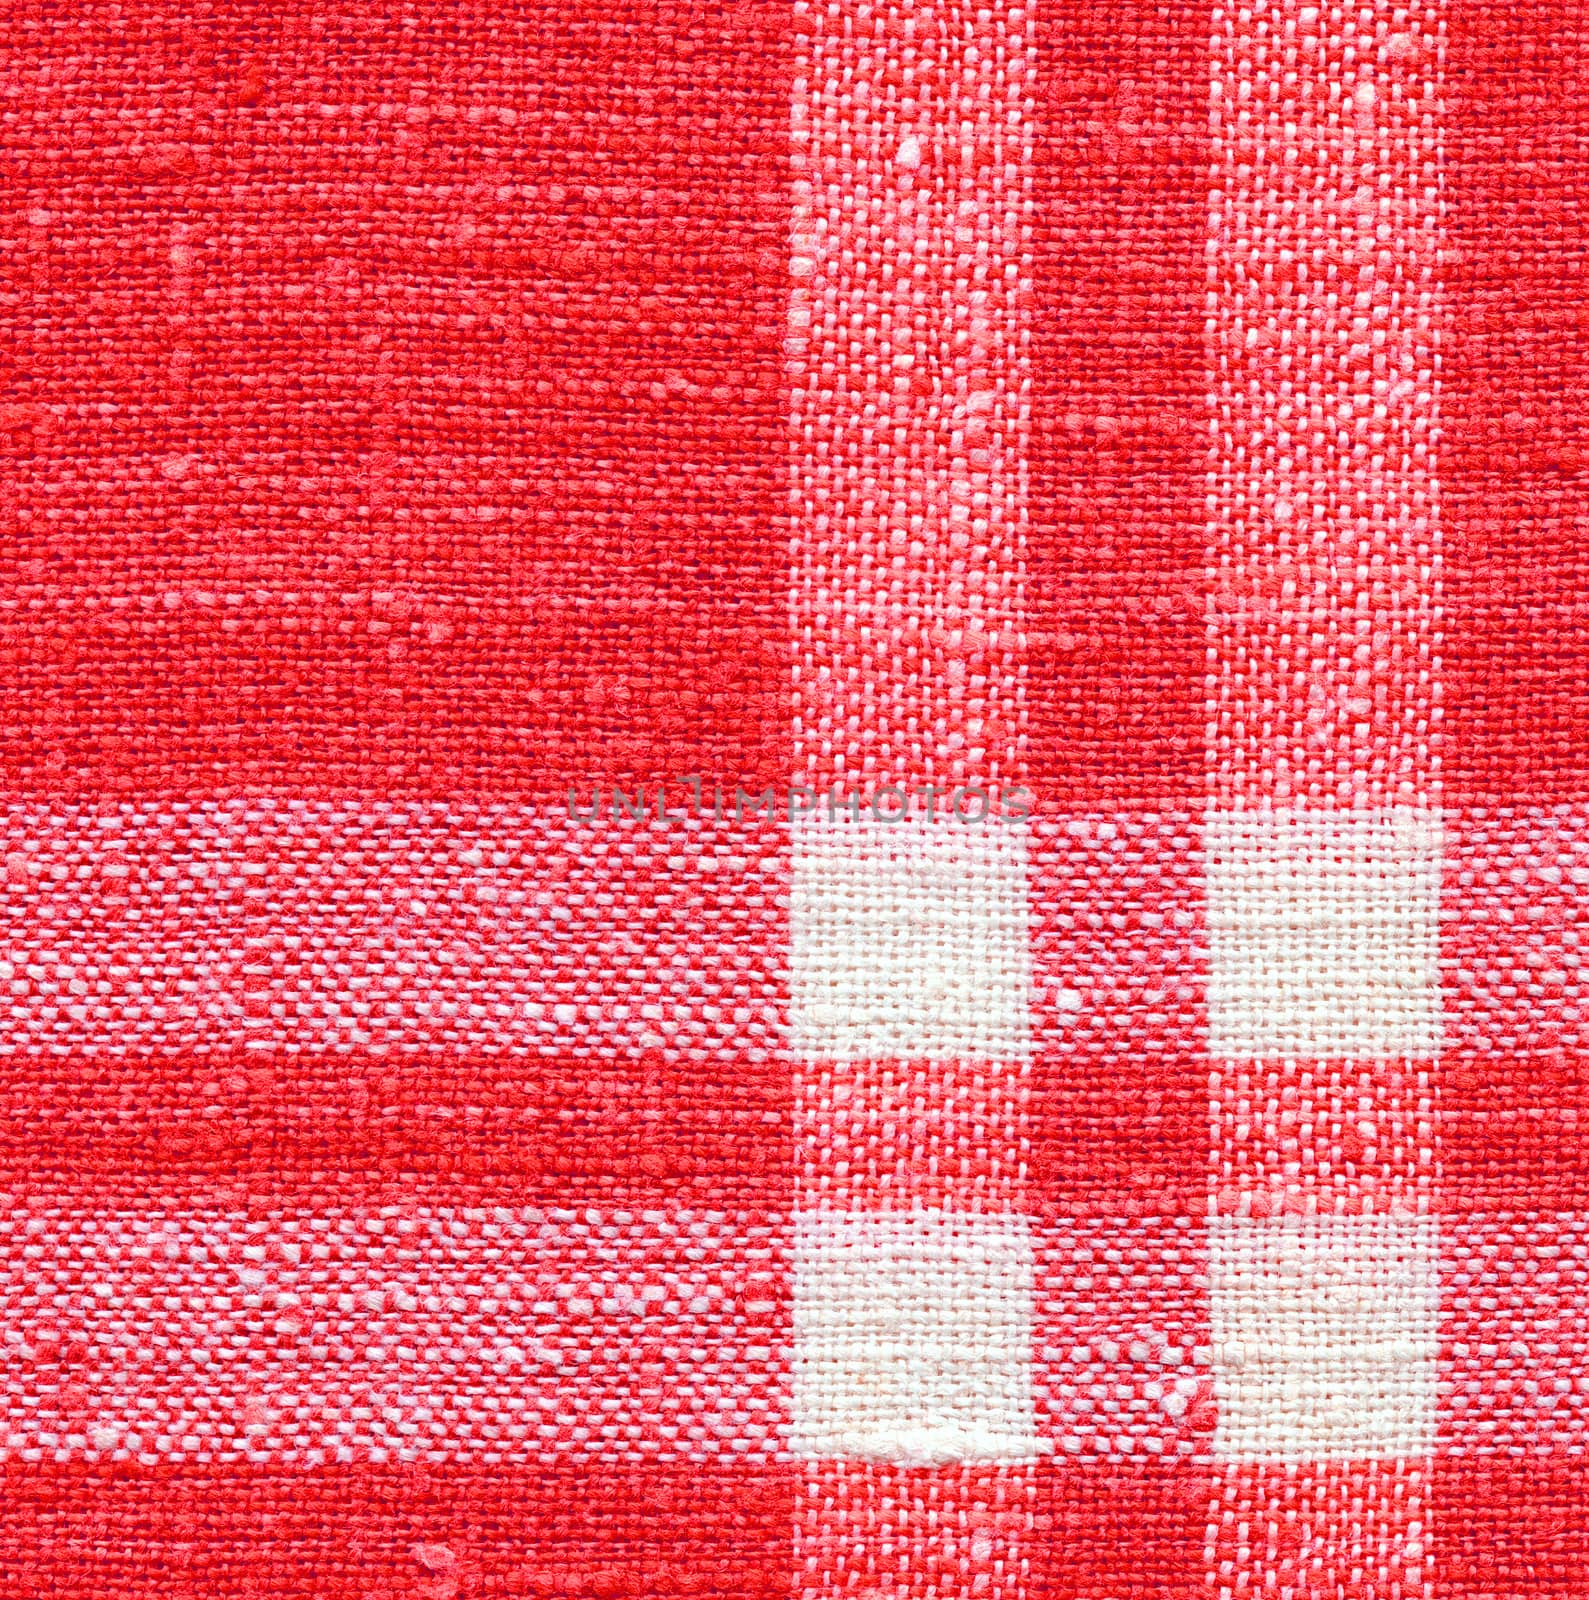 Canvas Texture. Red and White Color